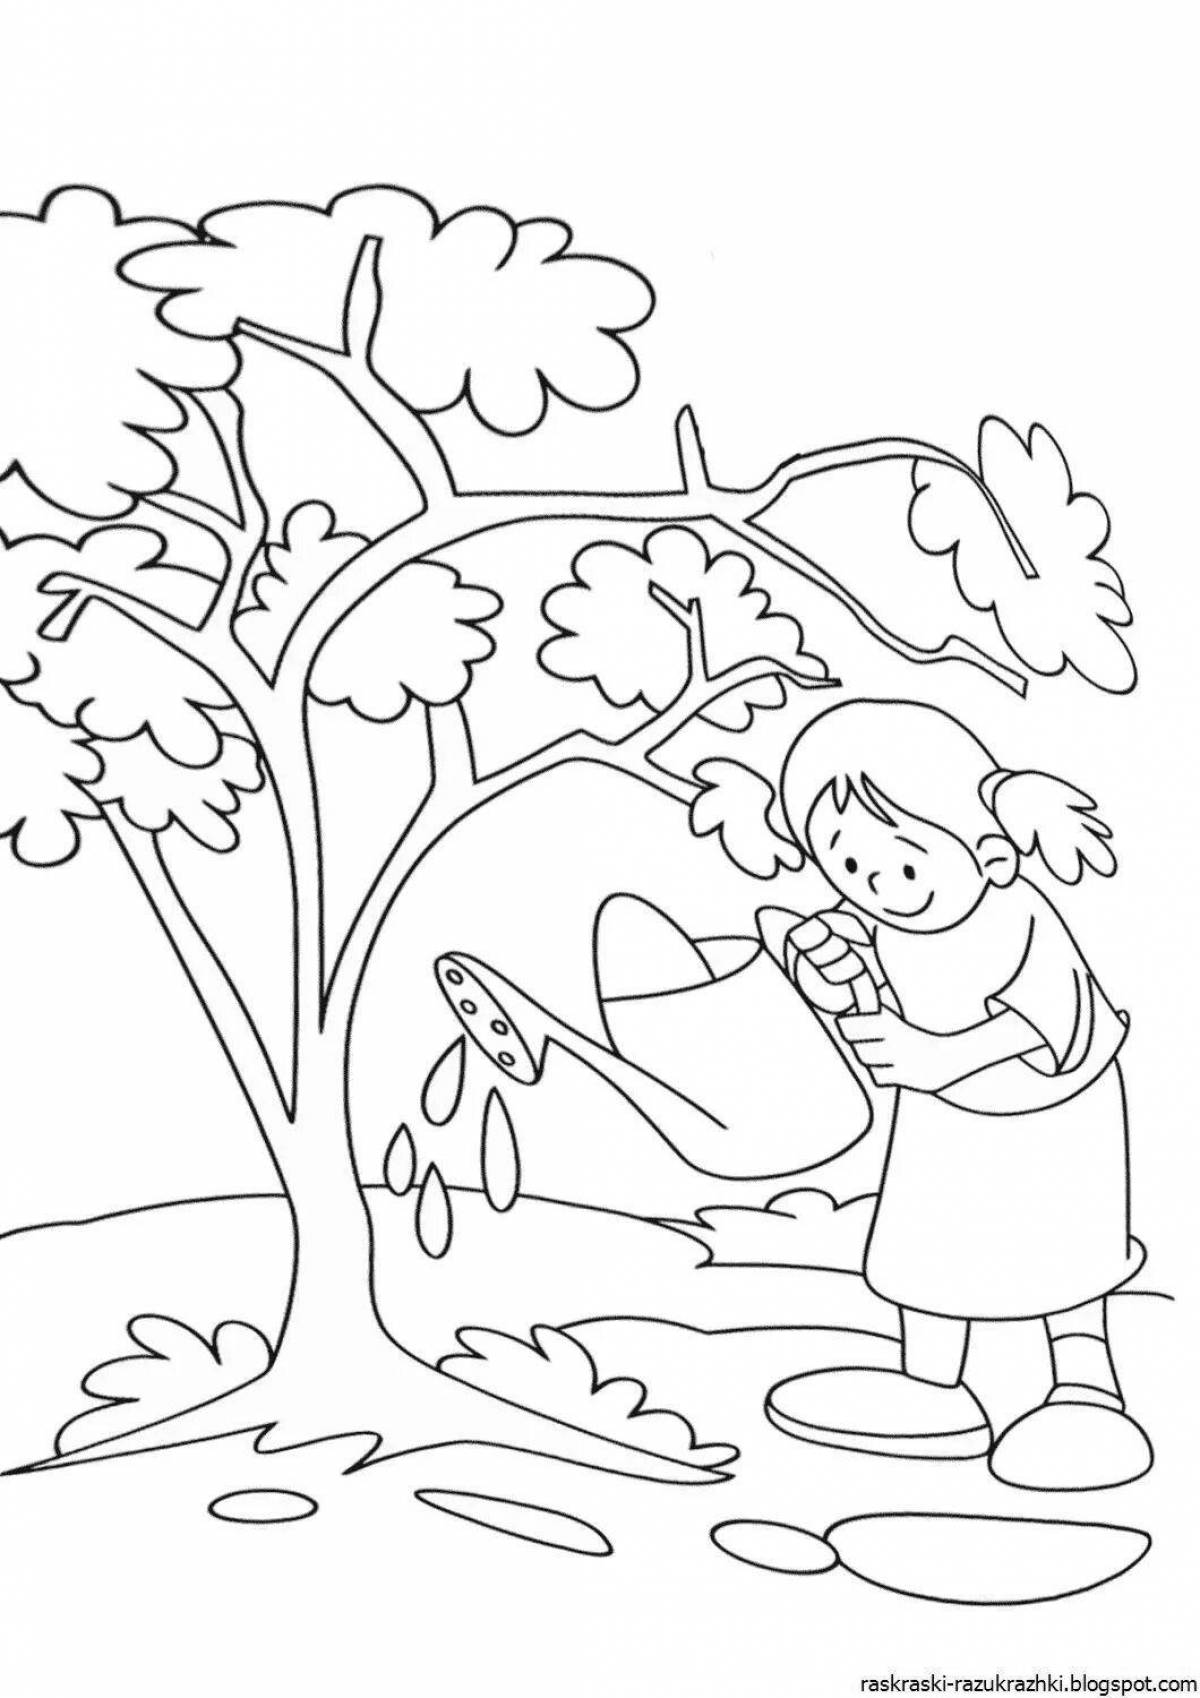 Coloured ecological coloring book for children